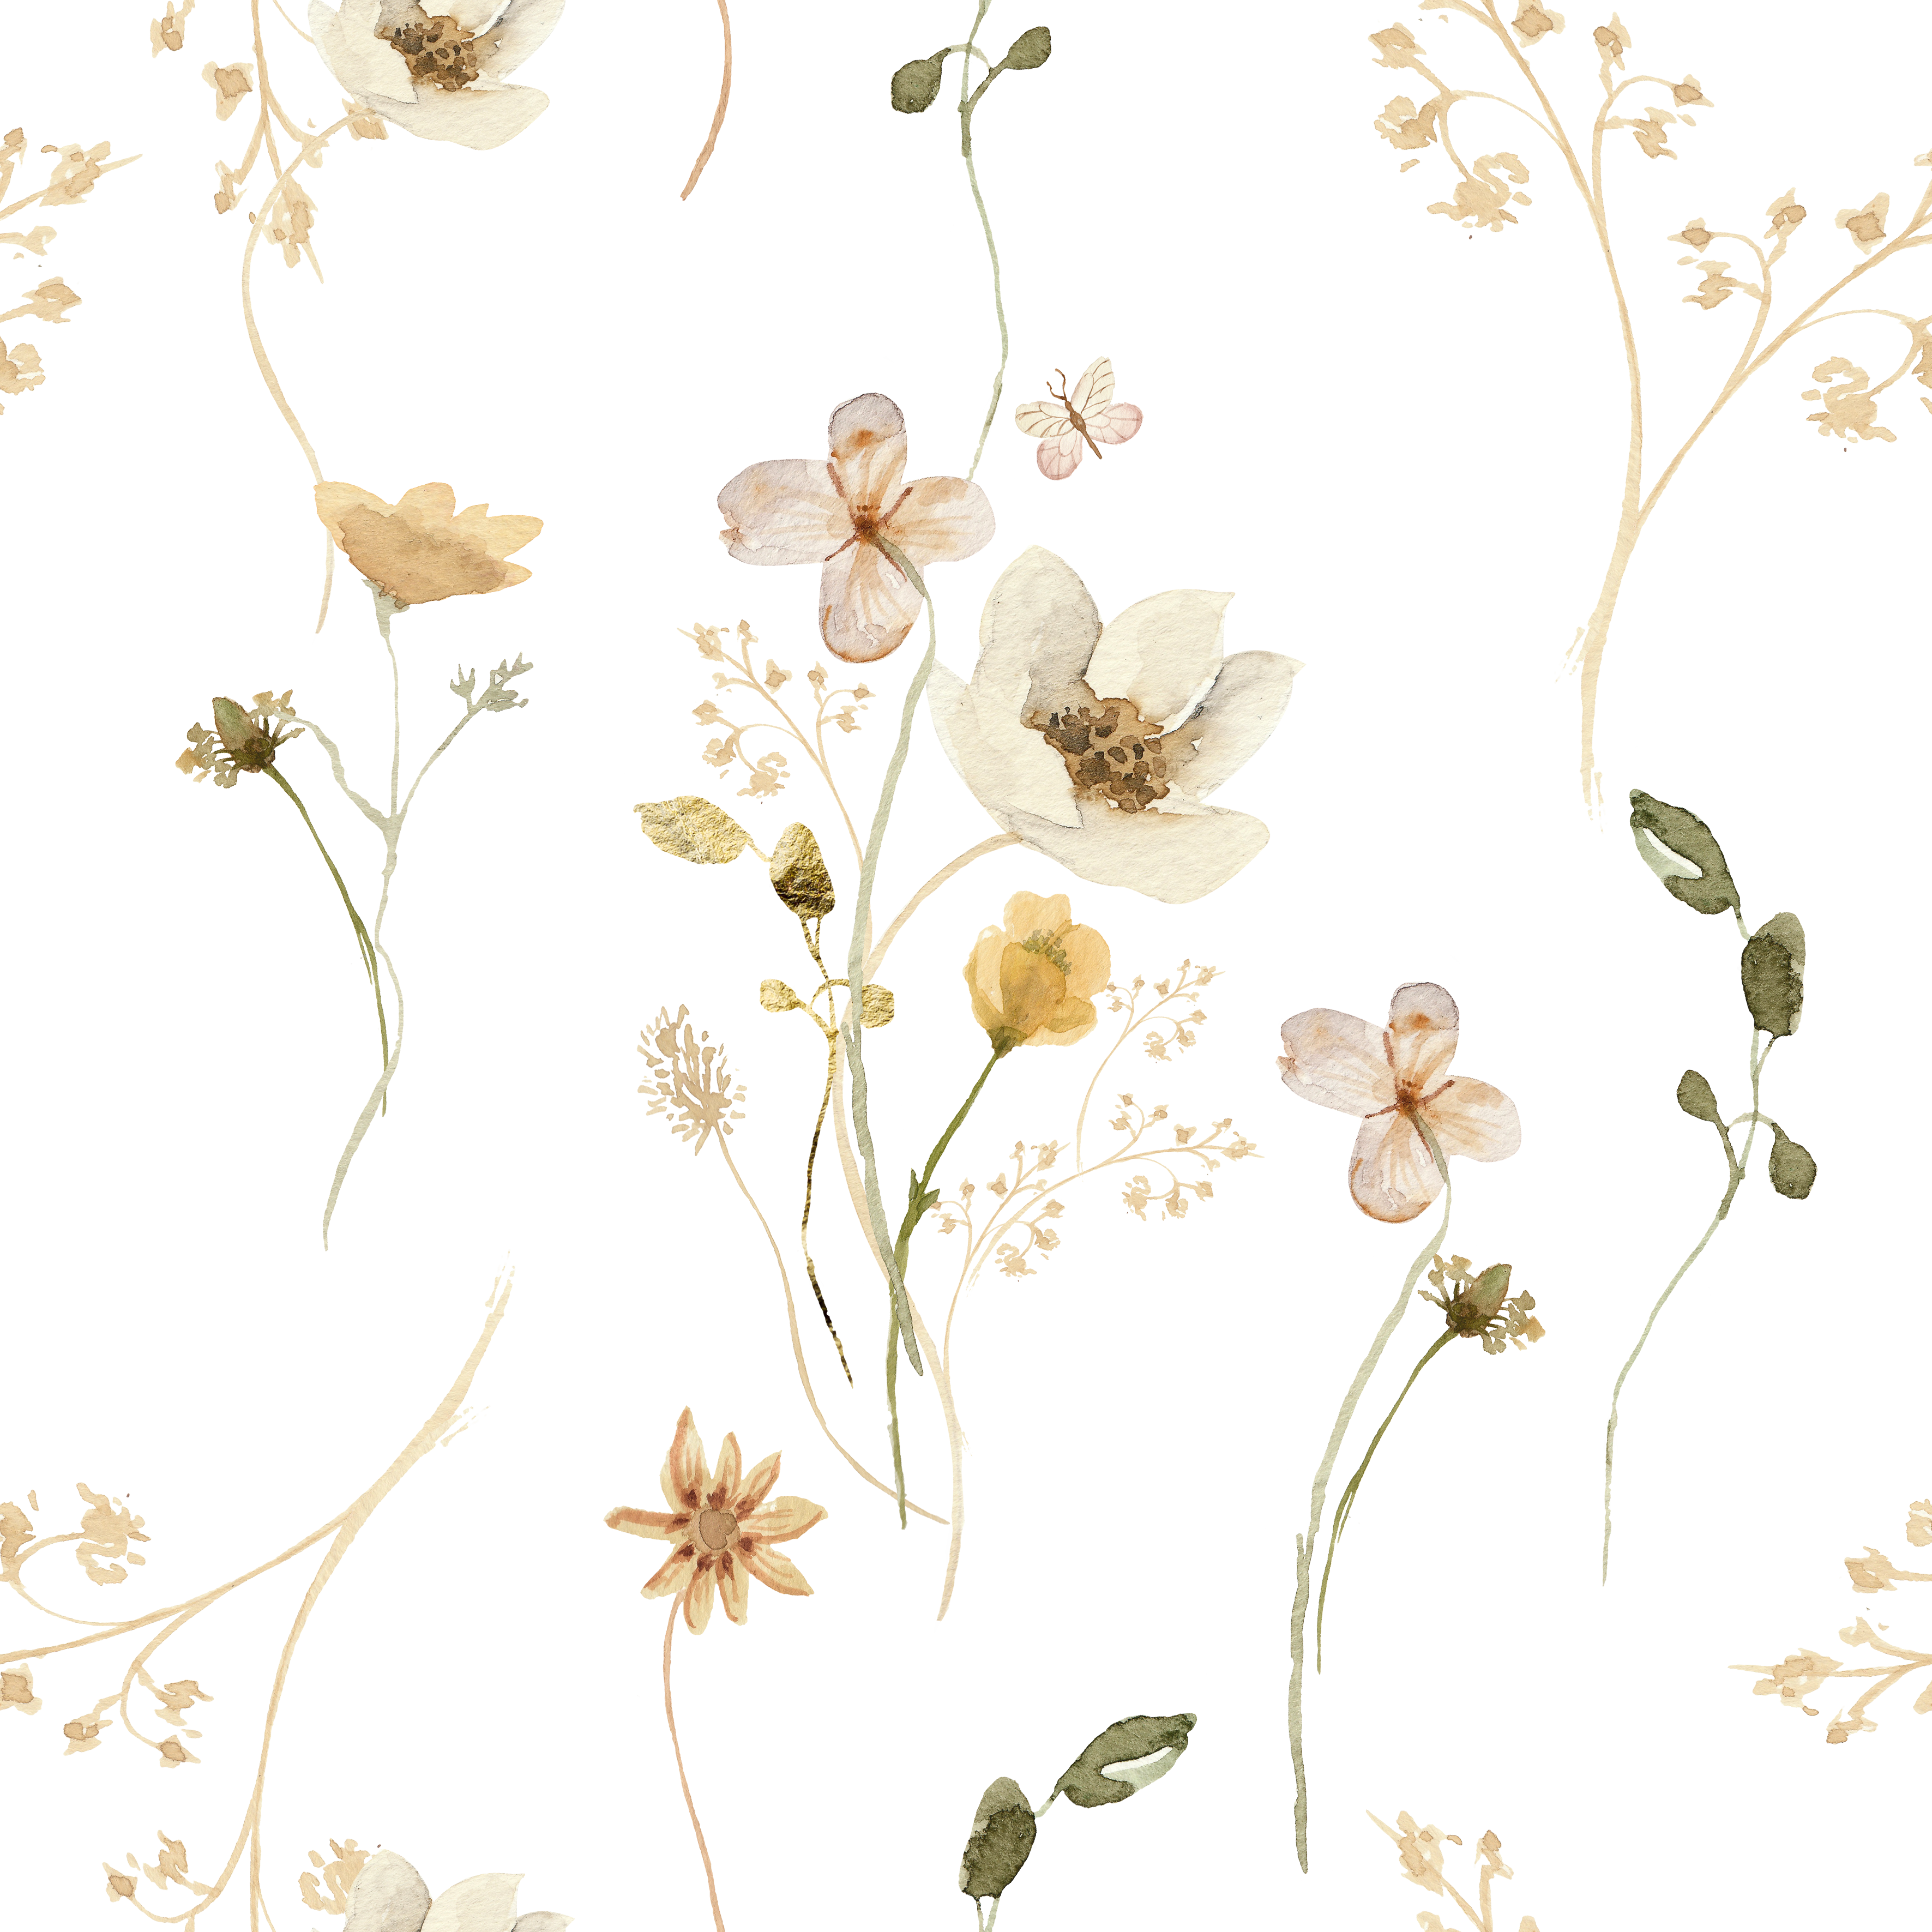 The Delicate Floral Wallpaper II is showcased against a dramatic black background, where the beige and cream floral illustrations take on an elegant contrast. This variant of the wallpaper offers a bold yet sophisticated backdrop, perfect for a statement wall in a contemporary setting.